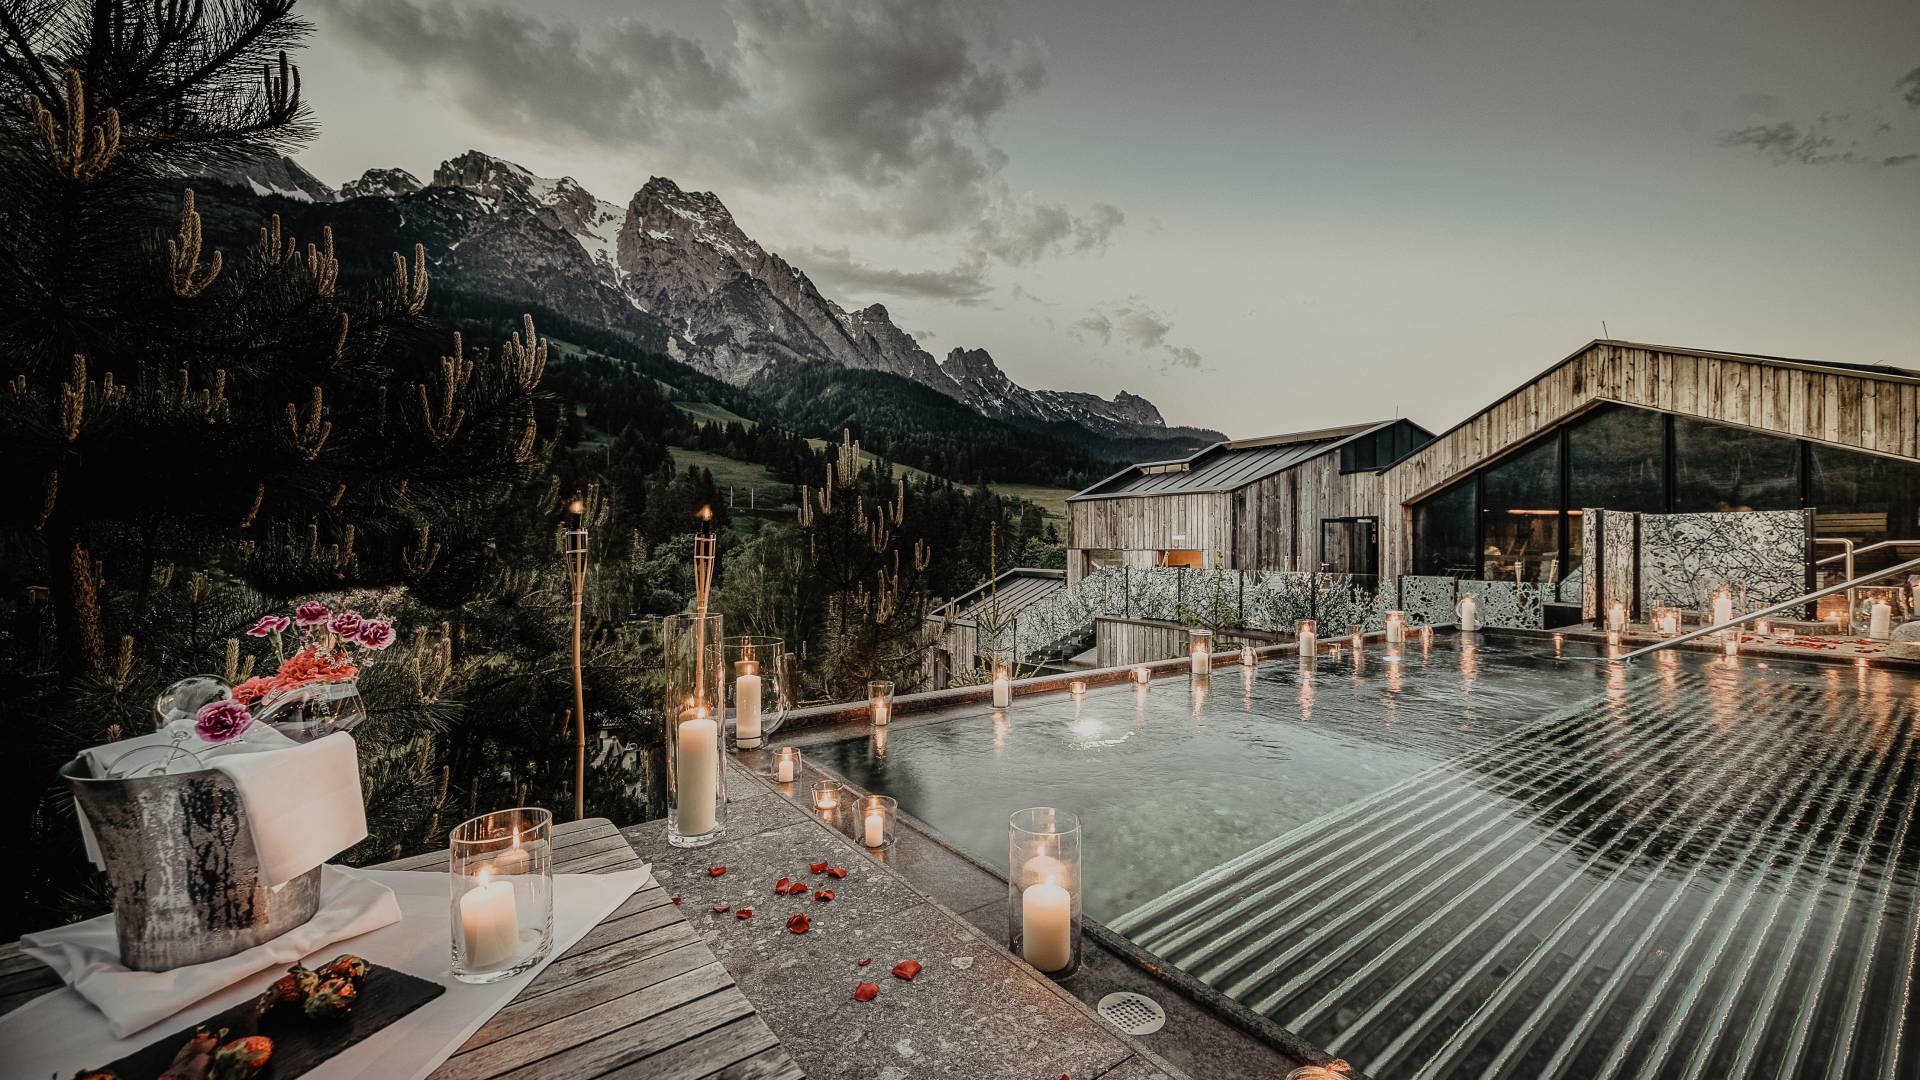 PrivateHOURS by candlelight in the forest spa with a view of the Leogang mountains.